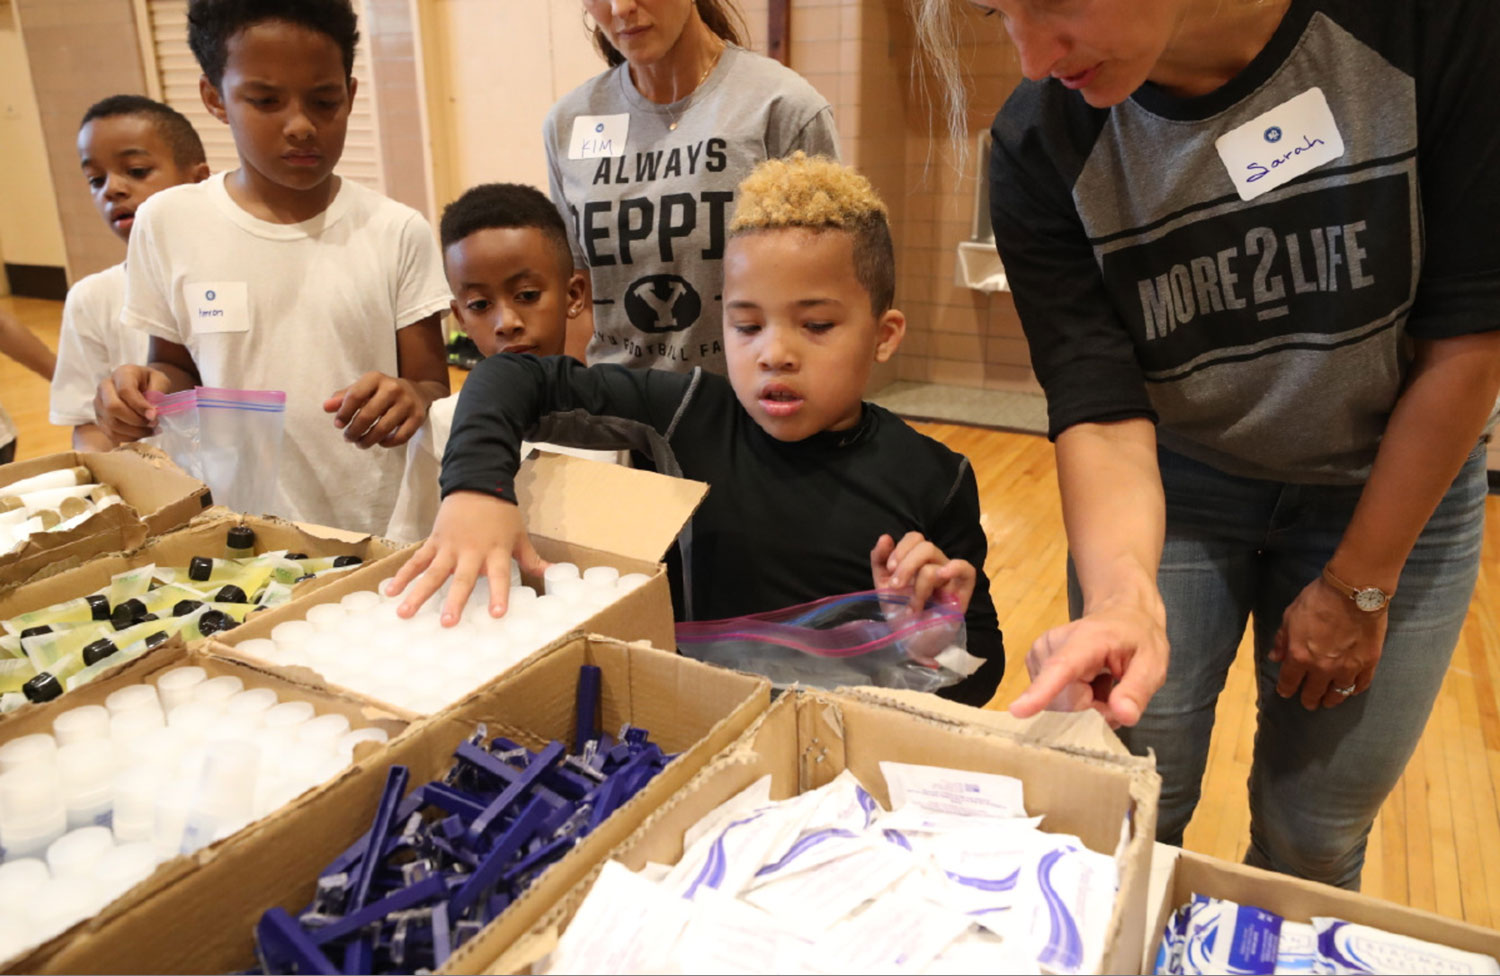 Kids line up to help build hygiene kits as part of a service project.